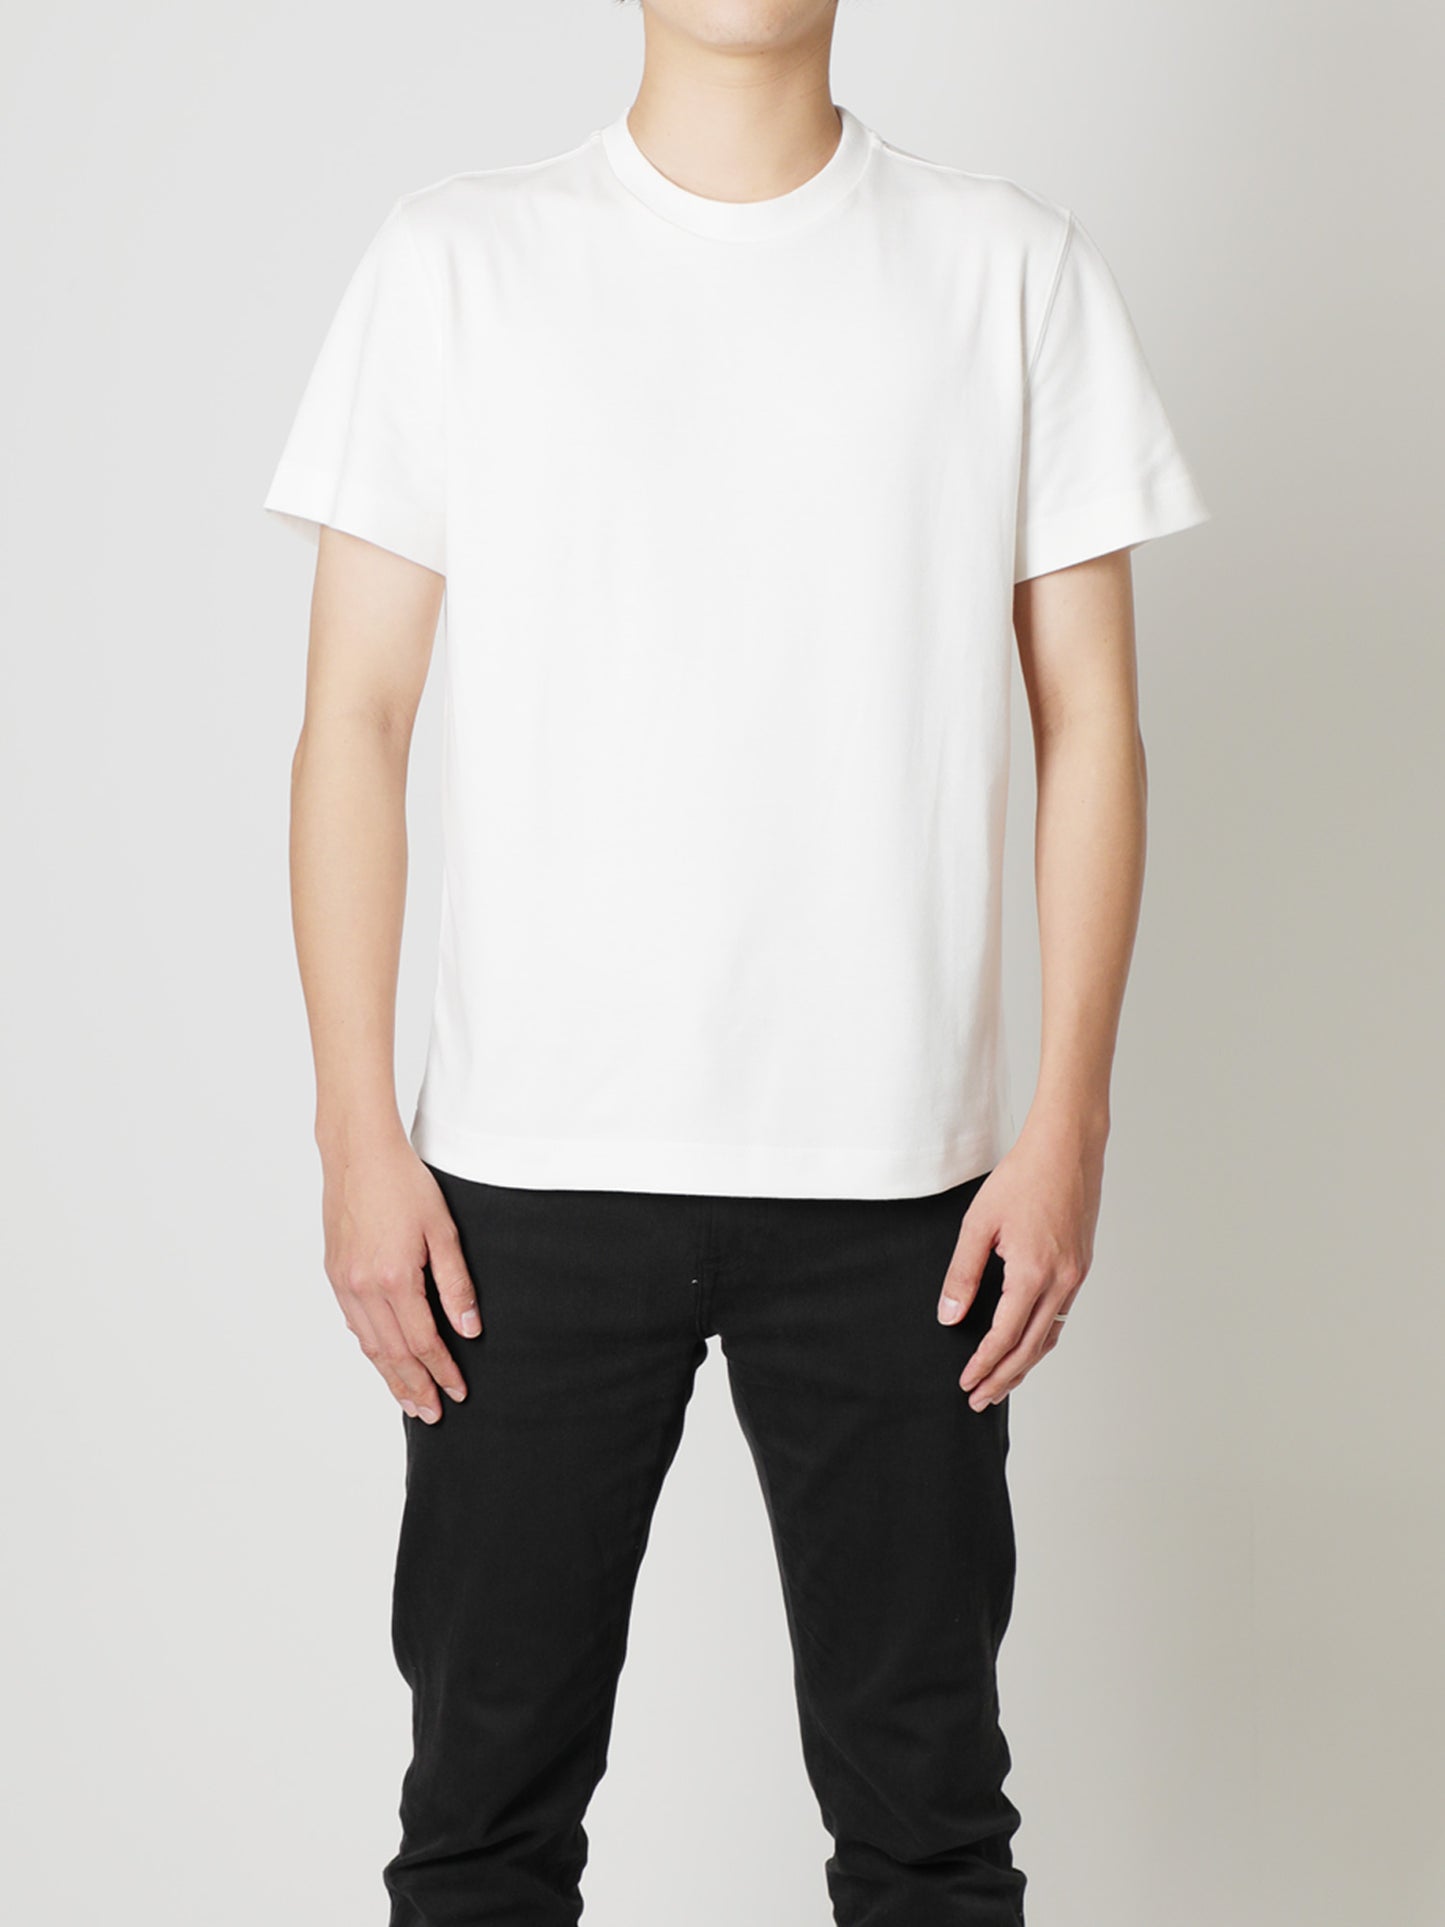 Regular fitted Basic Tee shirts